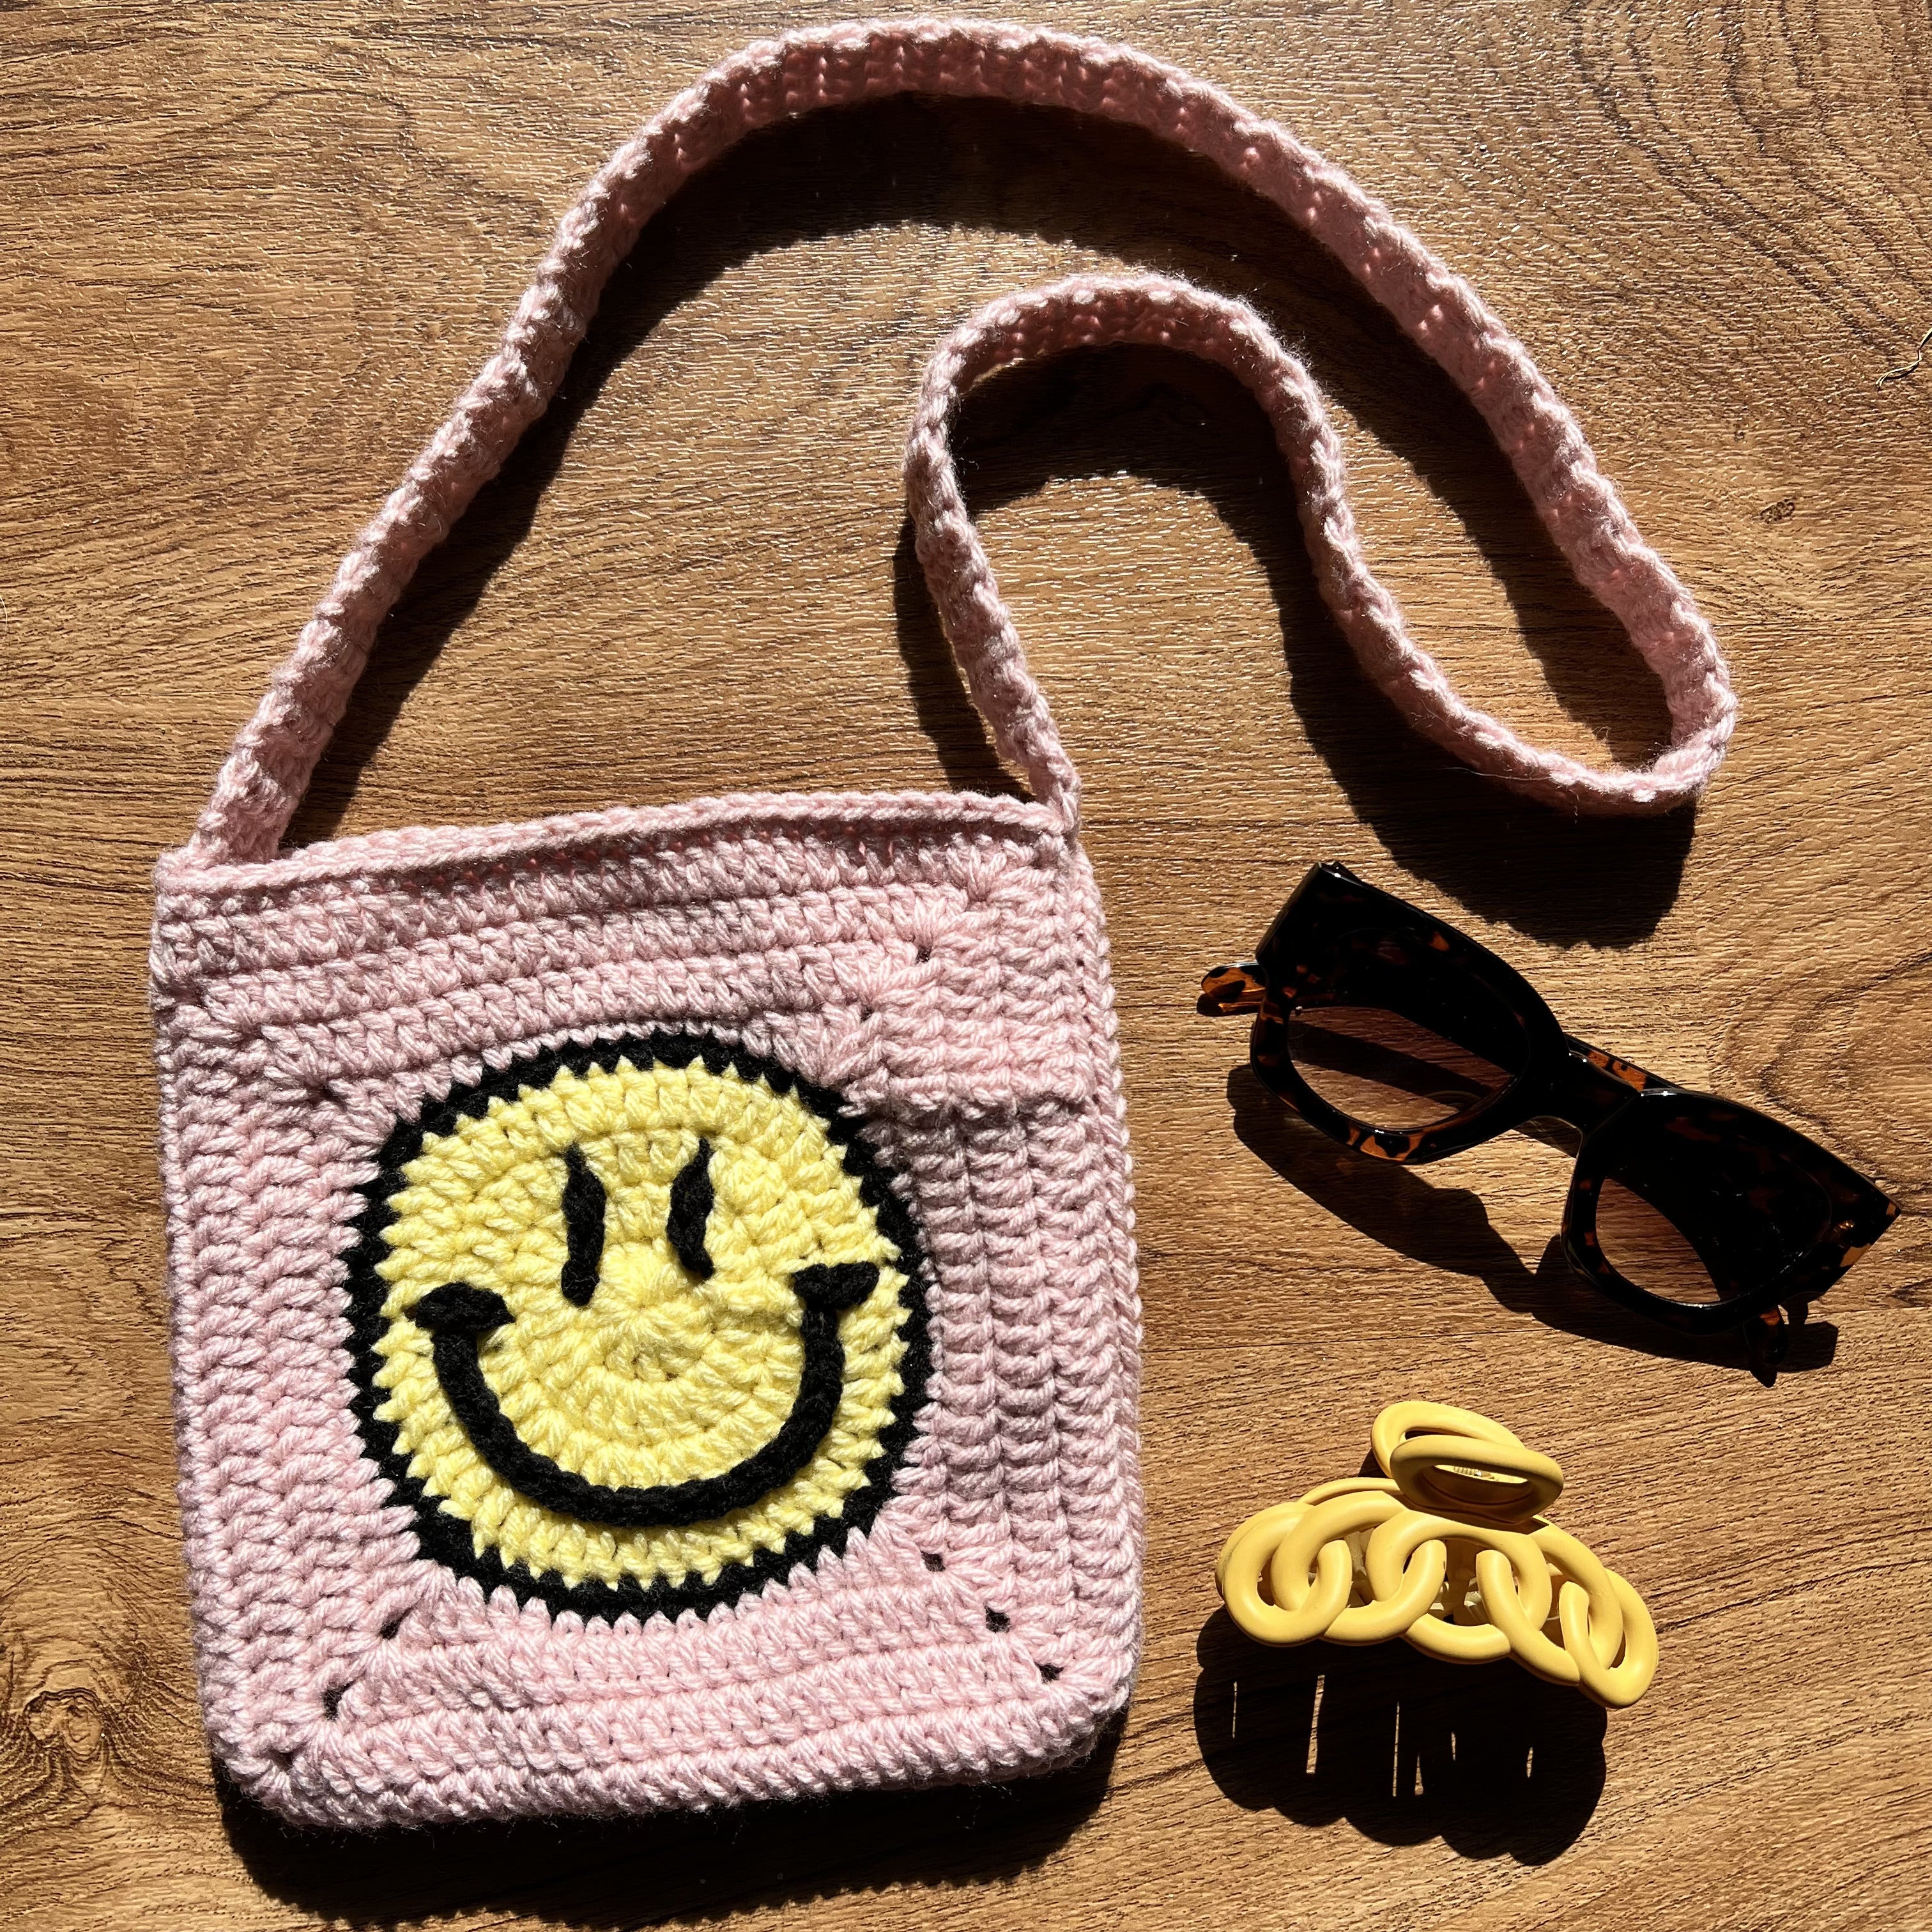 Beige Smiley Face Crochet Tote Bag, Yellow Smile Face Shoulder Bag, Granny  Square Bag, Handmade Woman's Purse, Gift for Her, Bag for Woman - Etsy